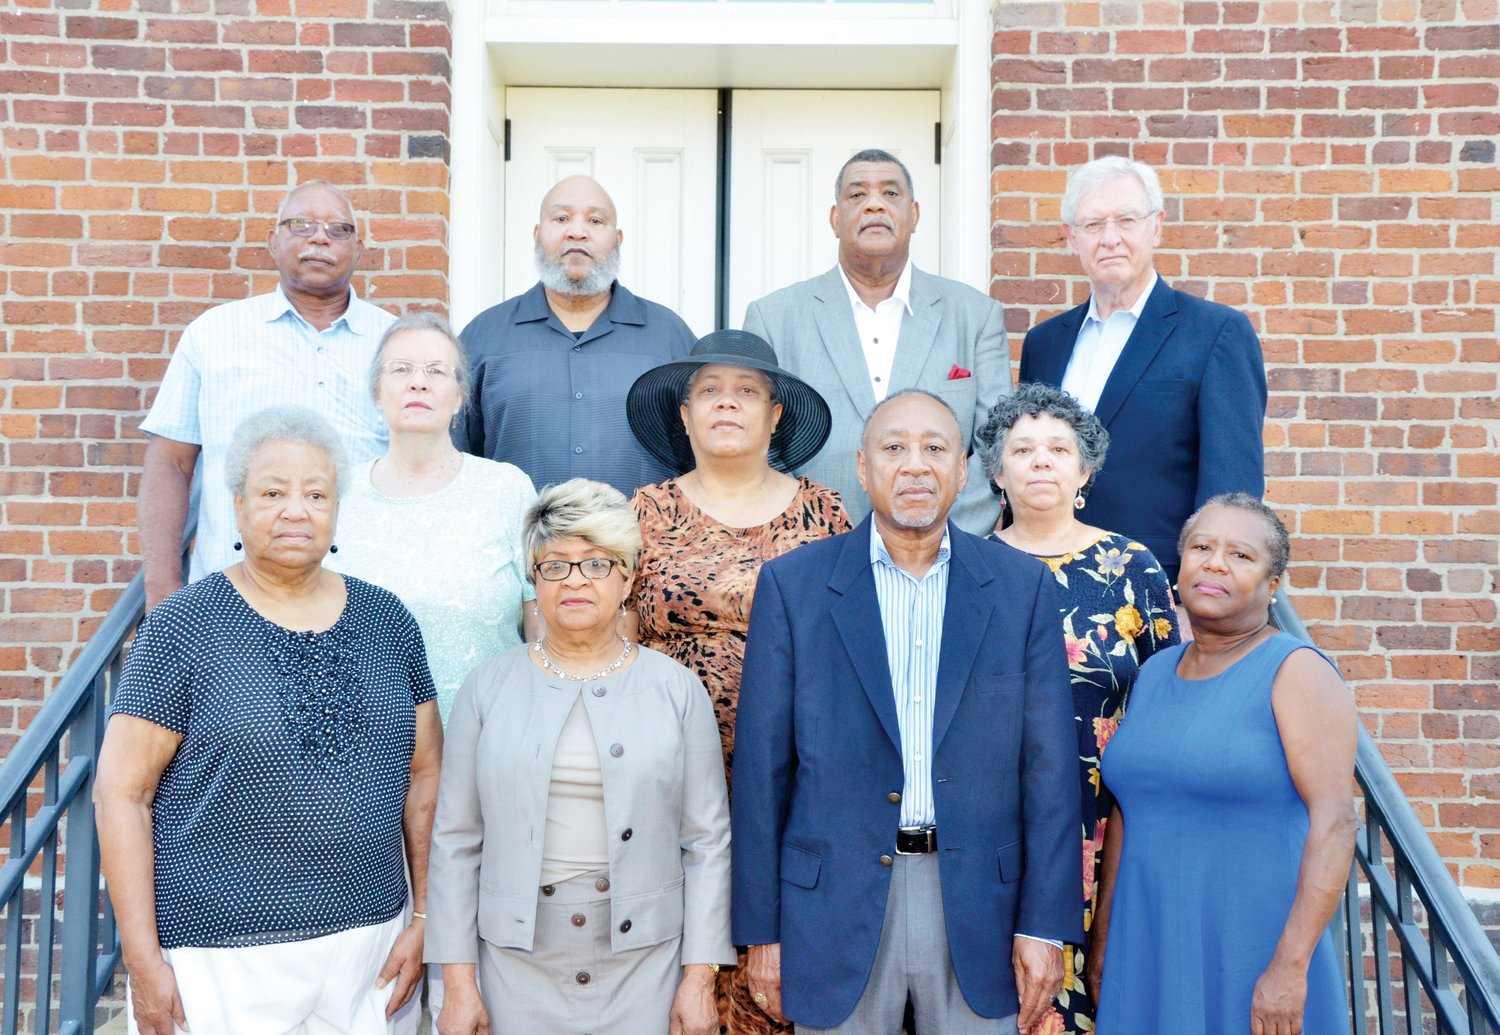 Members of Chatham County's two NAACP chapters who are involved in an effort to memorialize the six victims of racial terror lynching in Chatham stand on the steps of the PIttsboro courthouse. Front row, from left: Armentha Davis, Mary Harris, Larry Brooks and Mary Nettles. Middle row, from left: Vickie Shea, Cledia Holland and Linda Batley. Back row, from left: Glenn Fox, Wayne Holland, Carl Thompson and Bob Pearson. Pearson, a retired attorney and diplomat who lives in Fearrington Village, was responsible for getting the effort started.